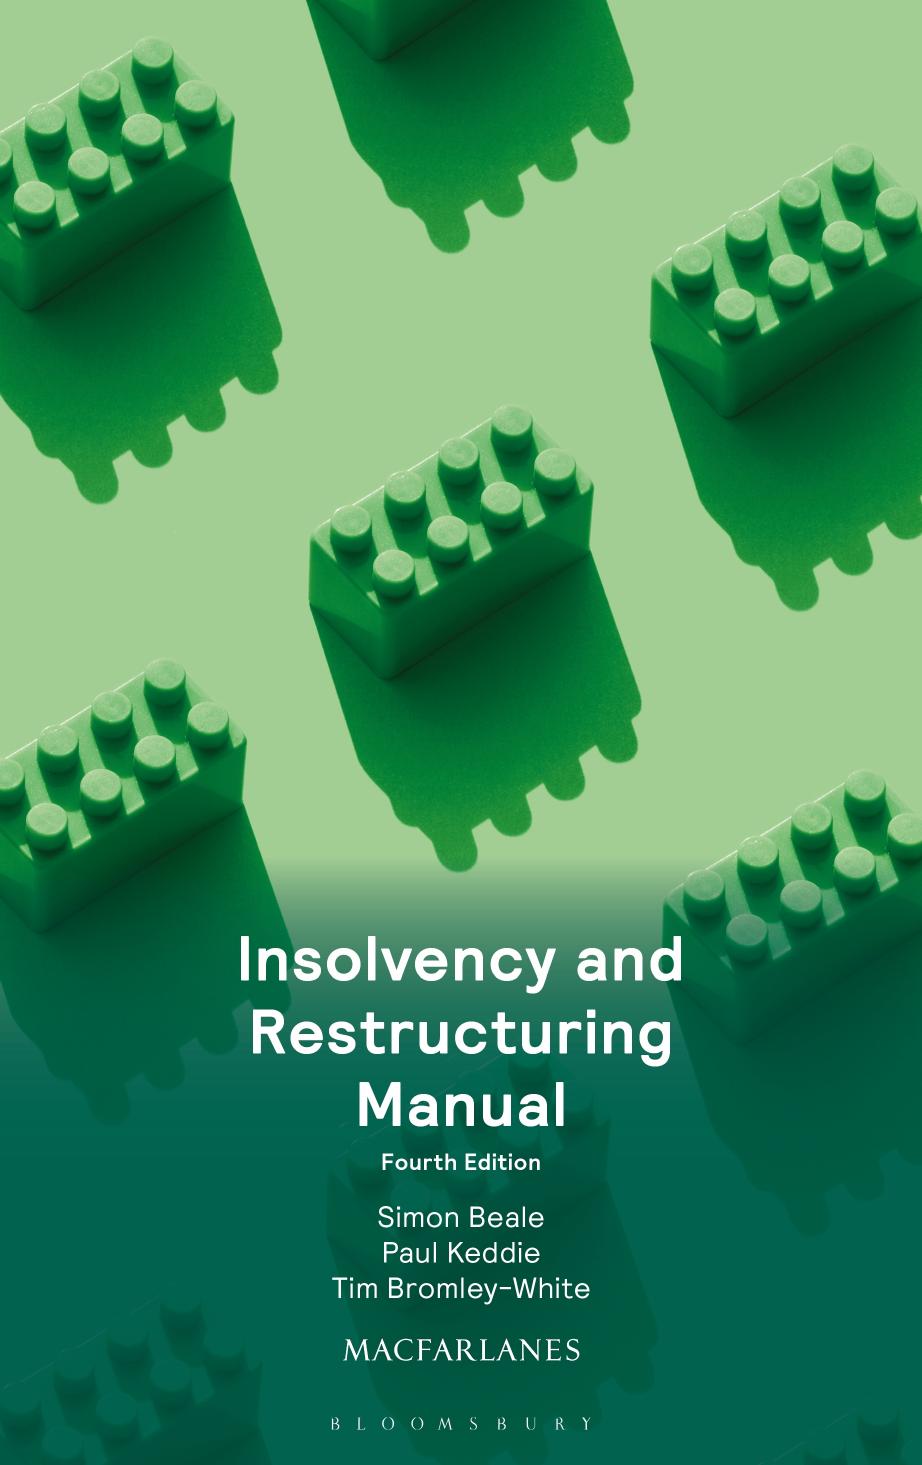 Insolvency and Restructuring Manual by Simon Beale; Paul Keddie; Tim Bromley-White (editors)